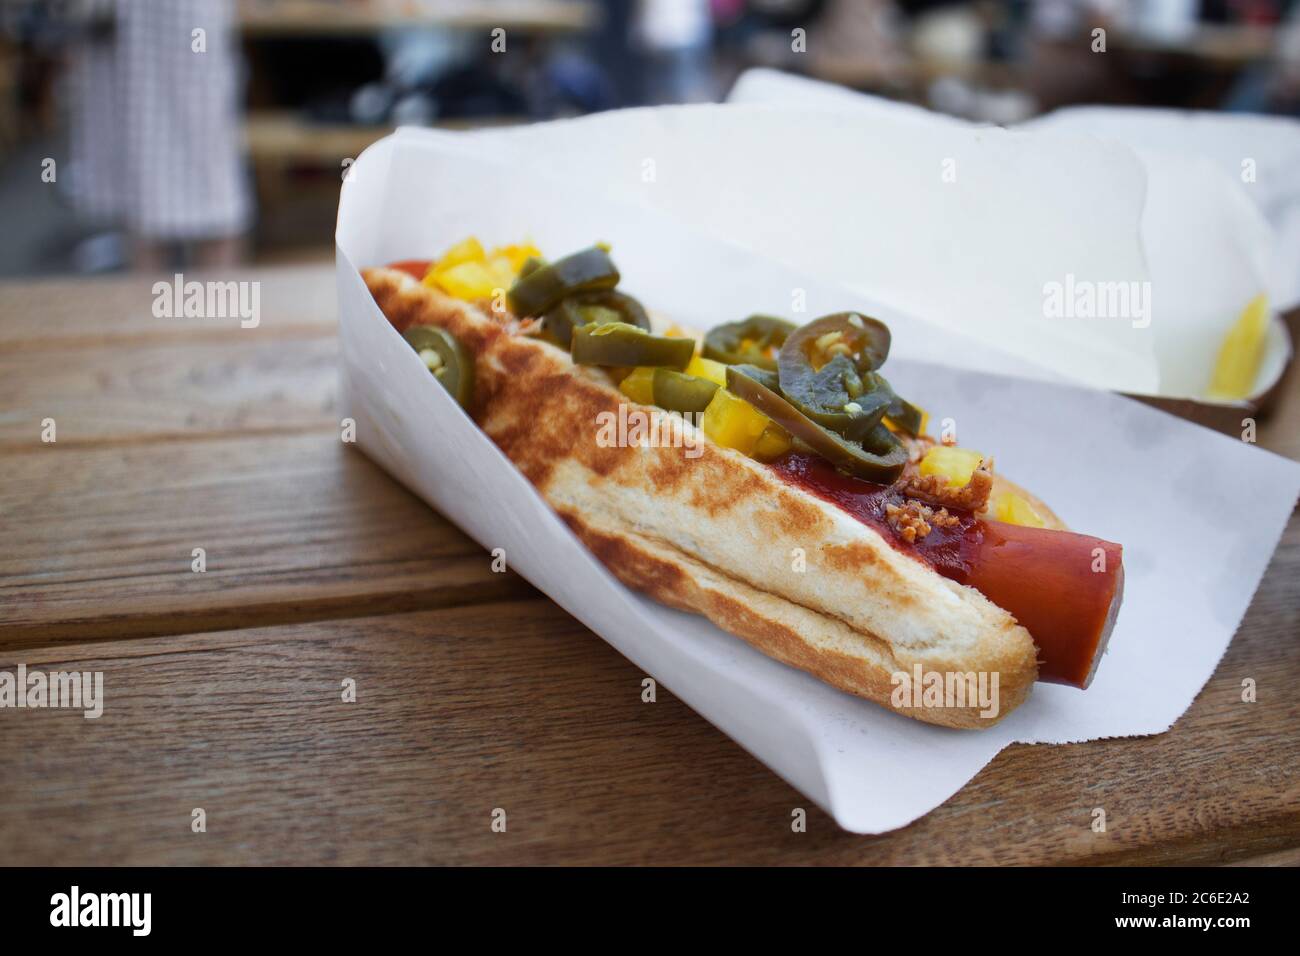 Hot dog with grilled sausages, onions and vegetables. Street food Stock Photo